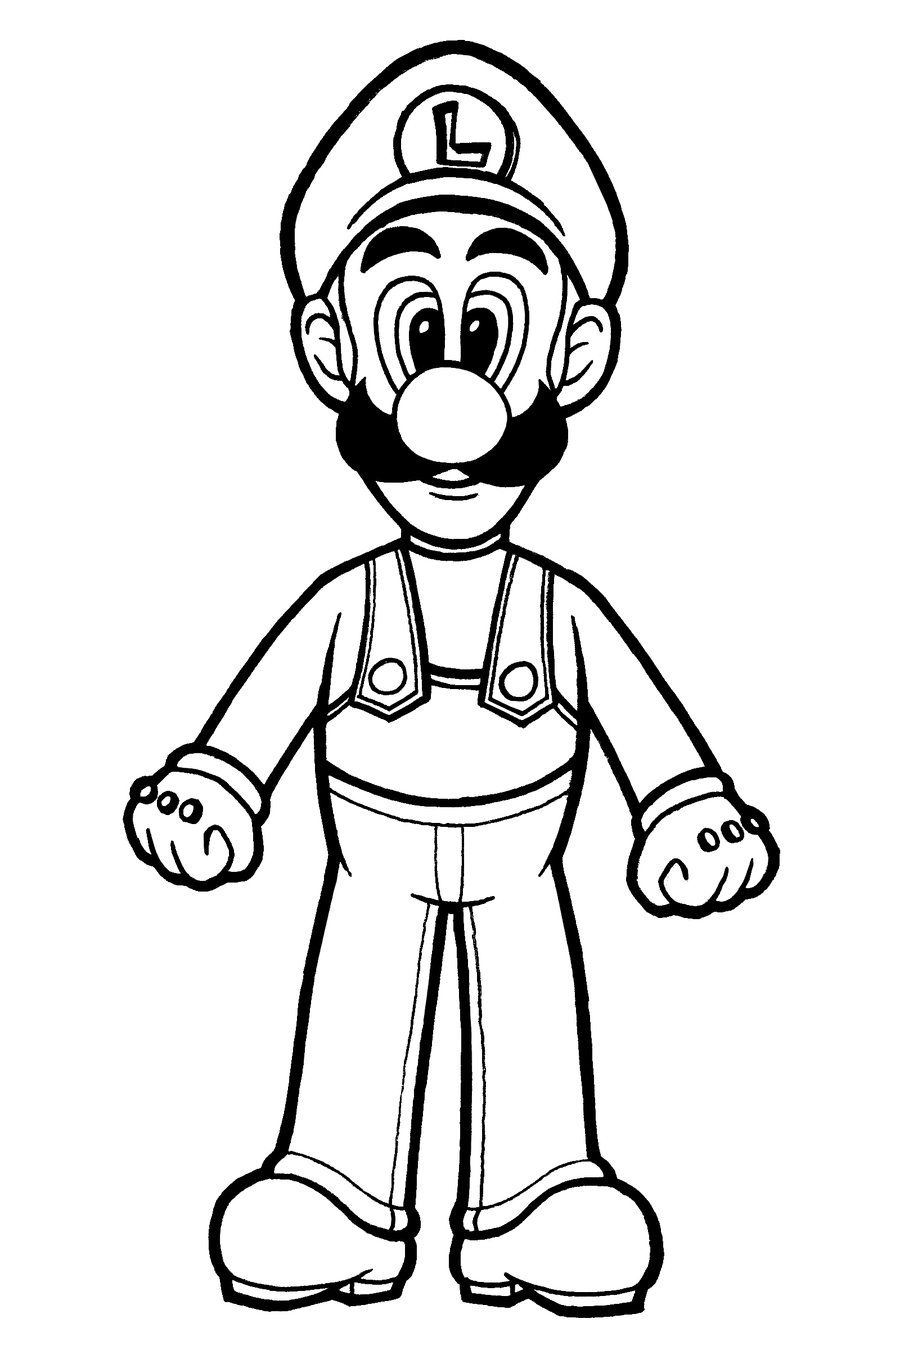 Luigi coloring page by spiritvii on deviantart mario coloring pages super mario coloring pages coloring pages